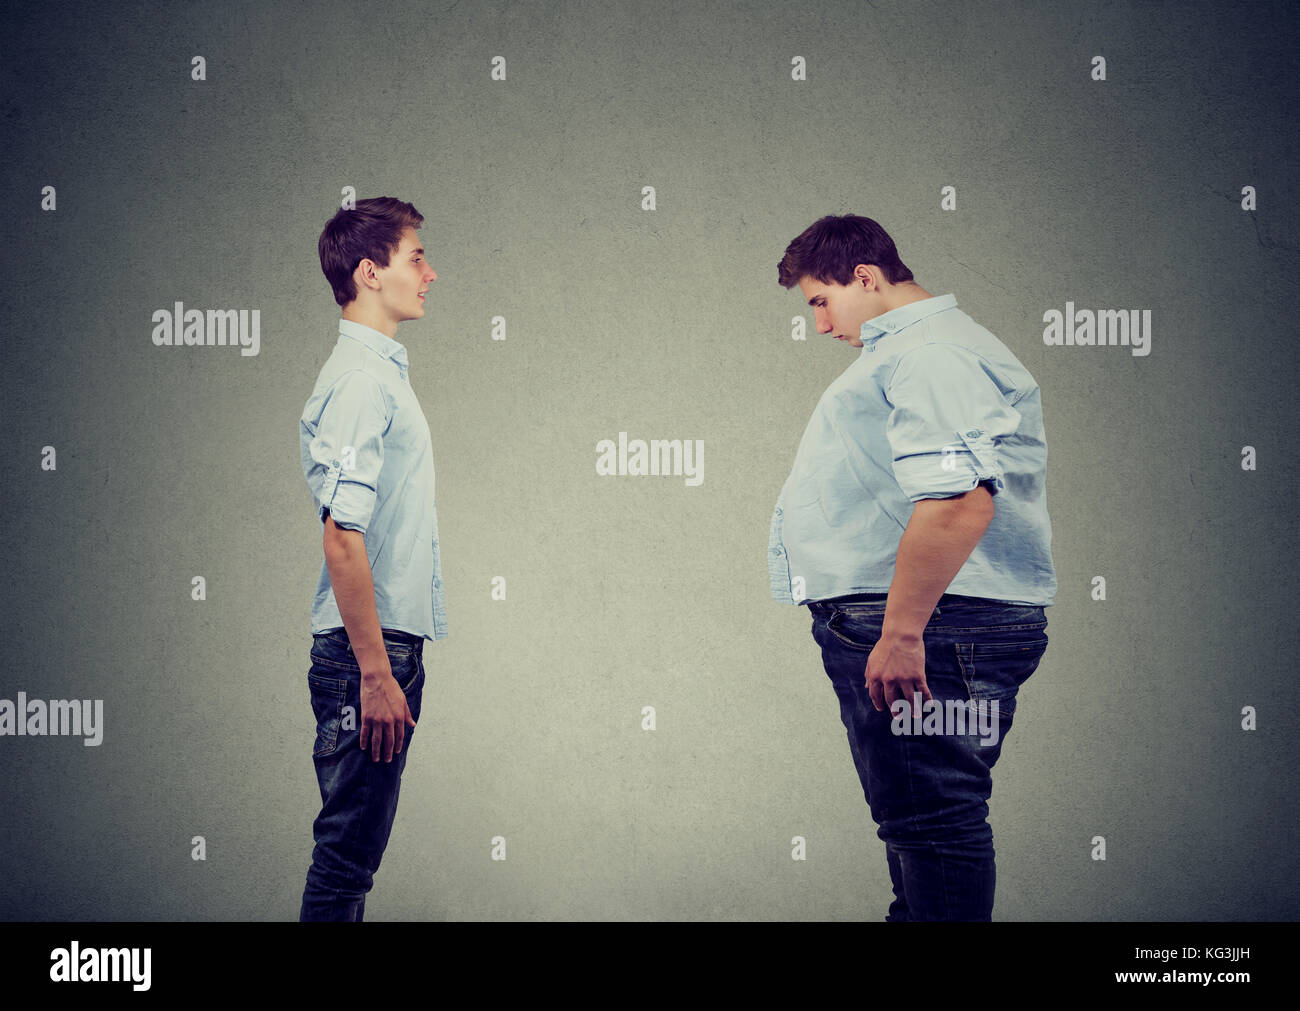 Young slim fit man looking at fat himself. Diet choice right nutrition healthy lifestyle concept Stock Photo